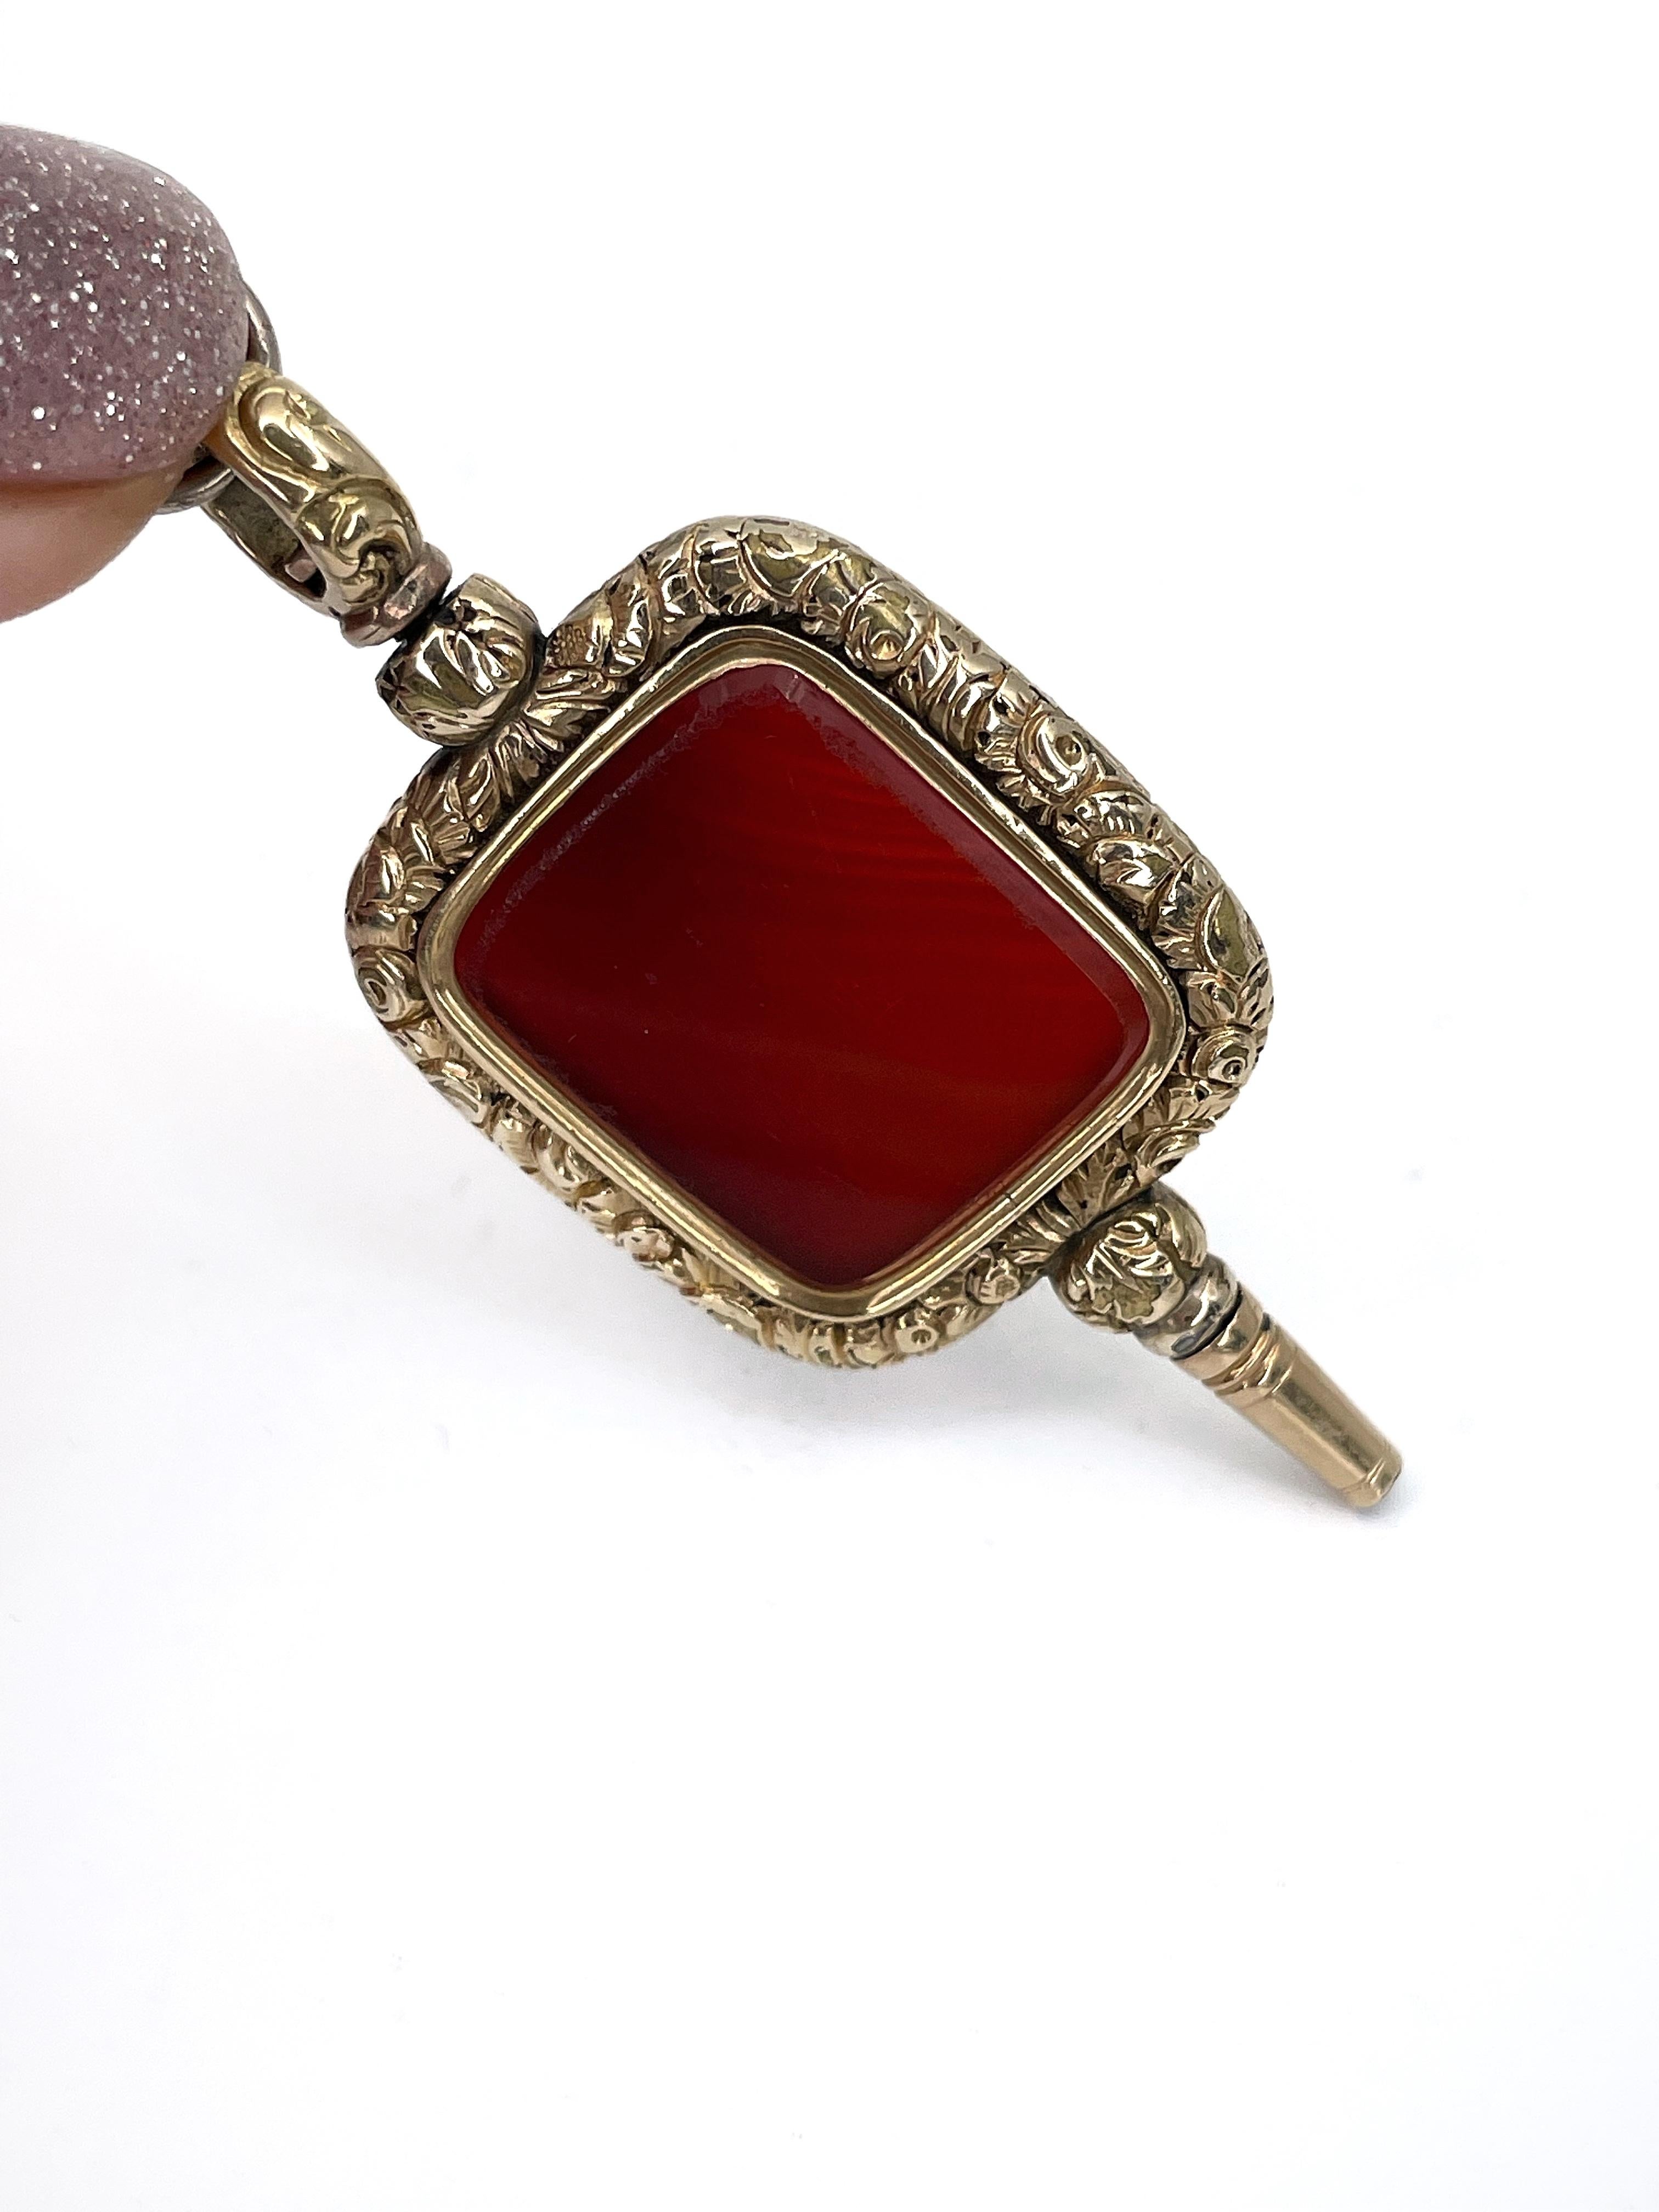 It is a lovely Victorian pocket watch key fob charm pendant crafted in base metal and adorned with gold. It features rectangle carnelian which is set in highly ornamented frames. 

Weight: 14g
Size: 6x2.5cm

———

If you have any questions, please